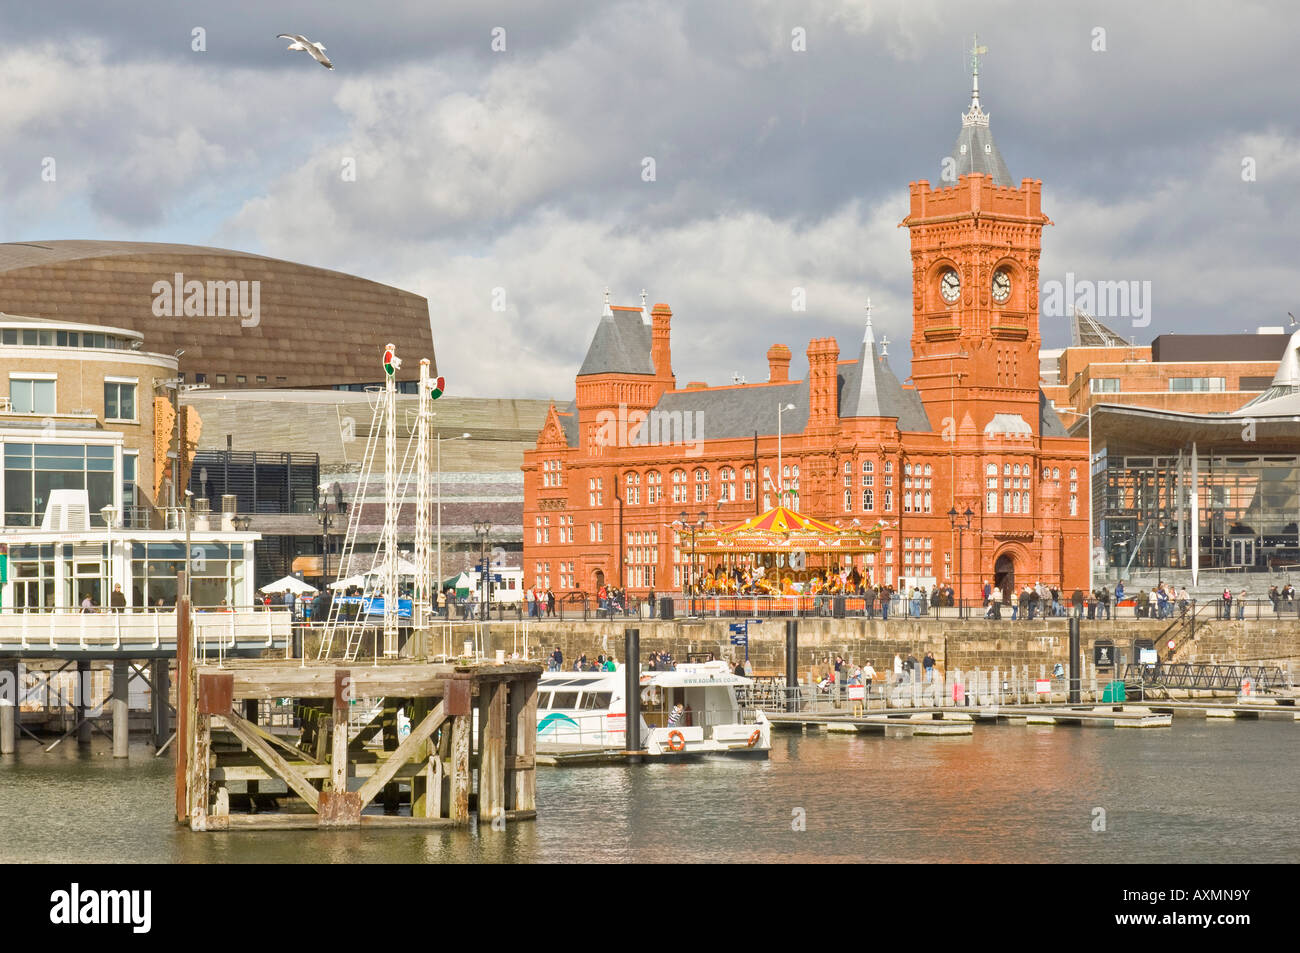 Central area of Cardiff Bay (Mermaid Quay) - a regenerated commercialised area south of Cardiff with the Pierhead Building. Stock Photo